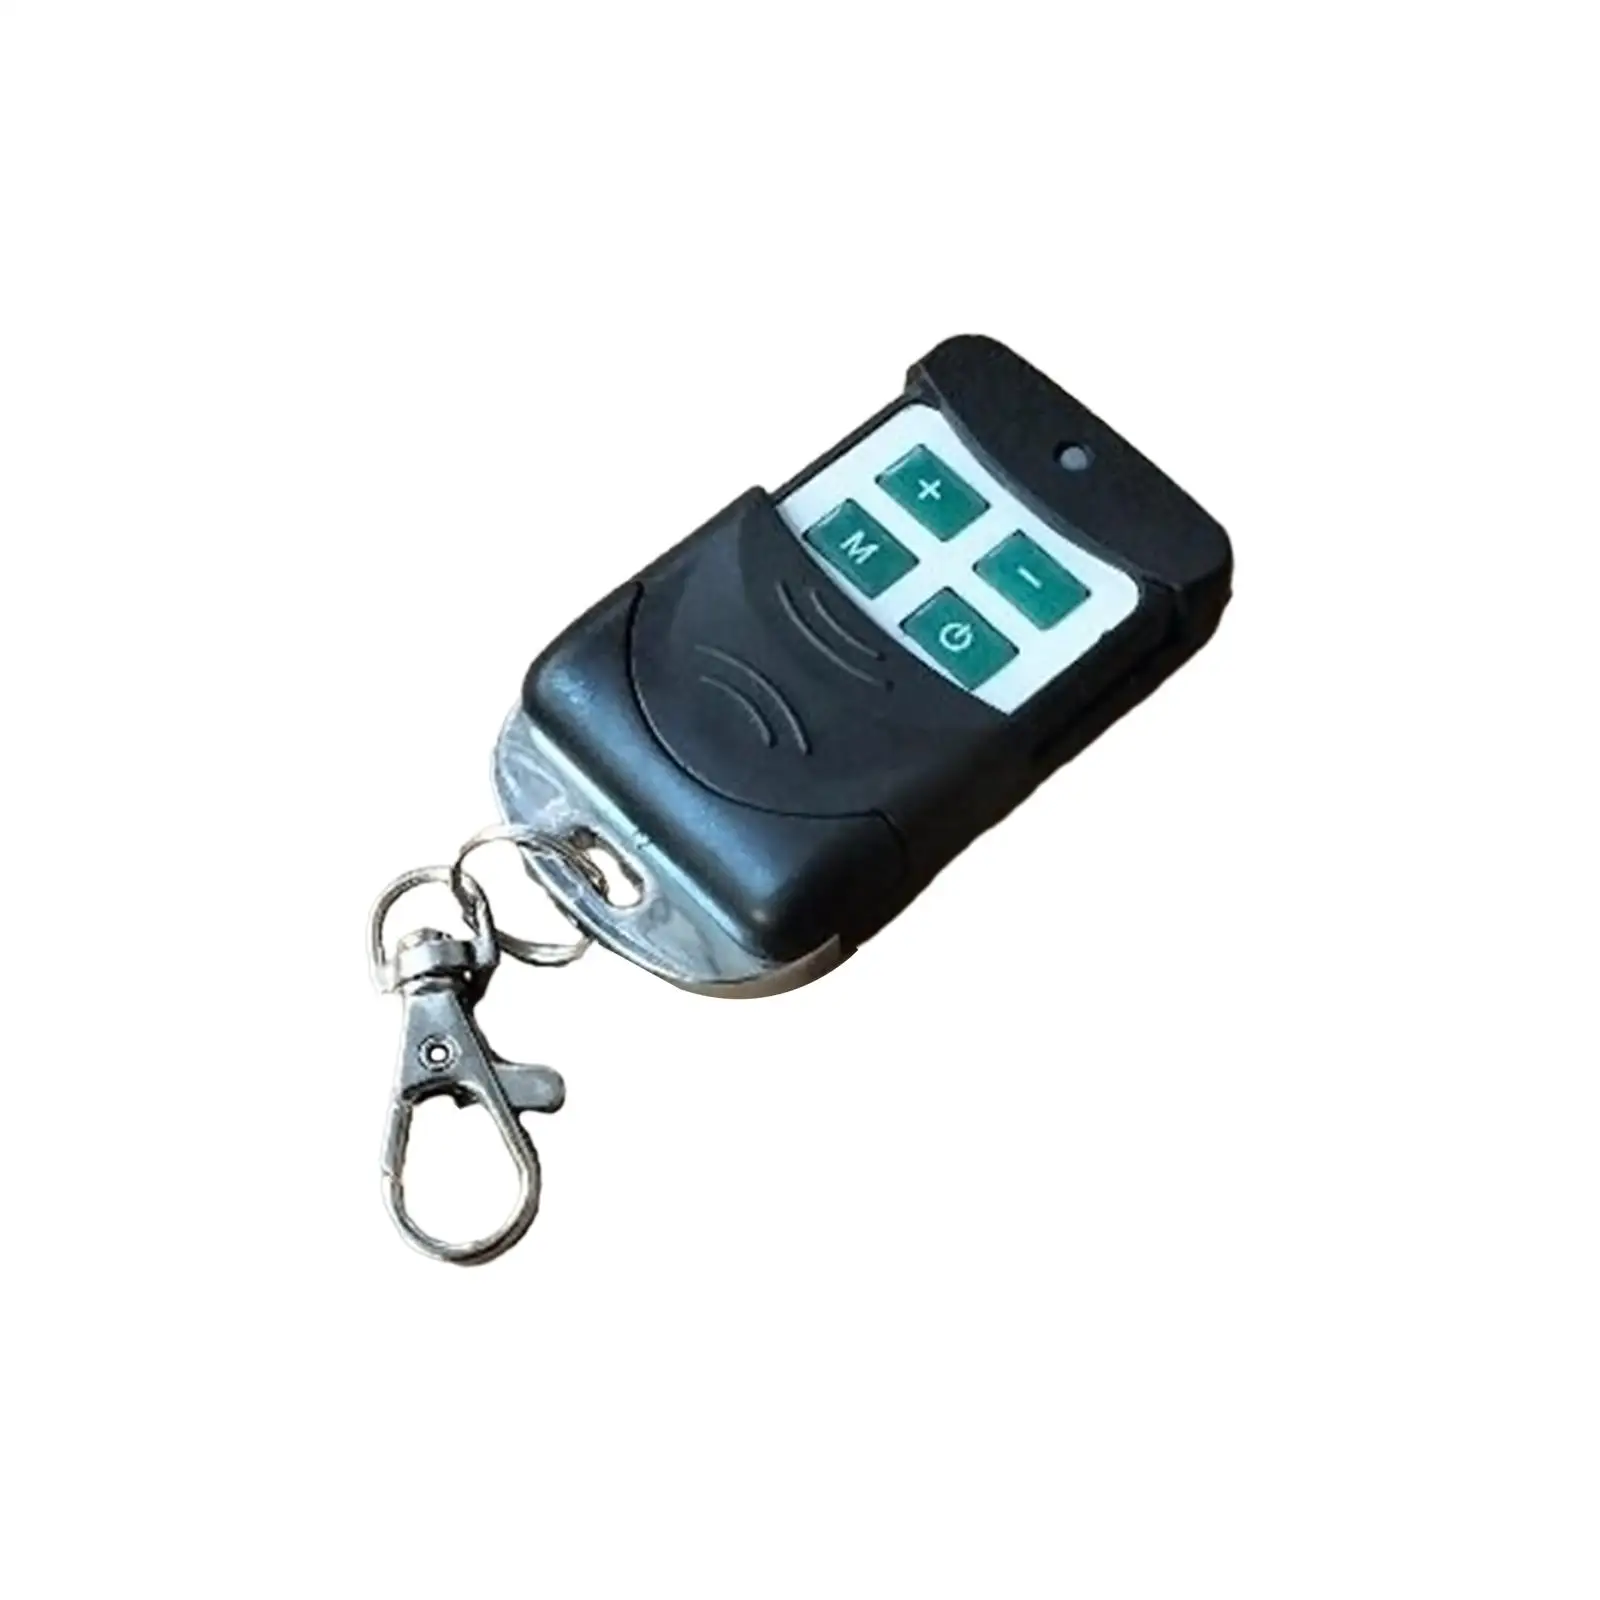 Car Parking Heater Remote Control Switch Remote Control Controller for Vehicle Heating Accessories Motorhomes Trucks